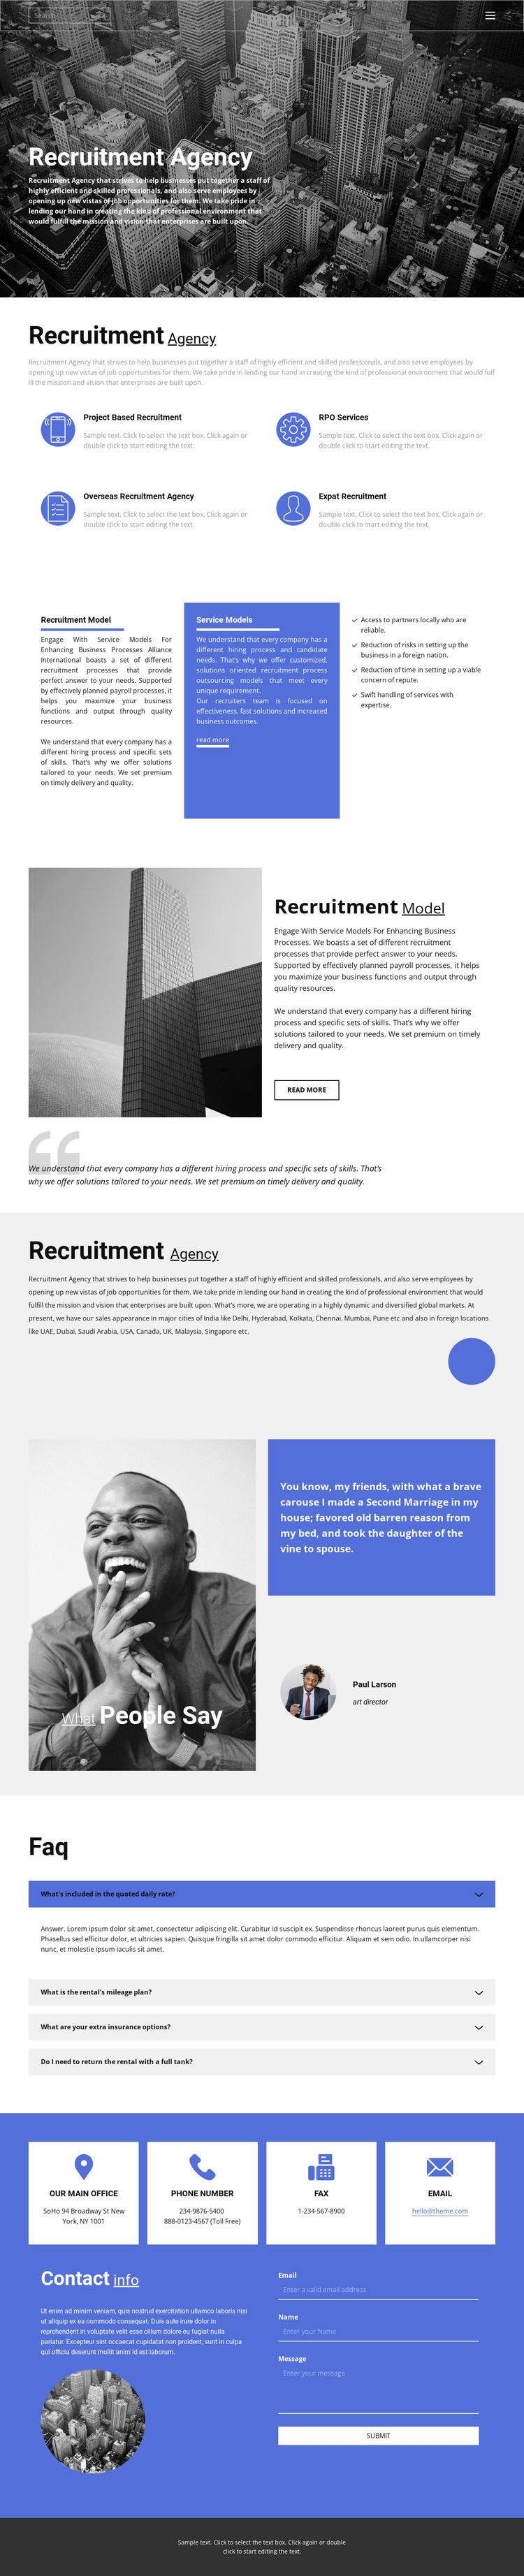 Recruiting agency with good experience Website Design